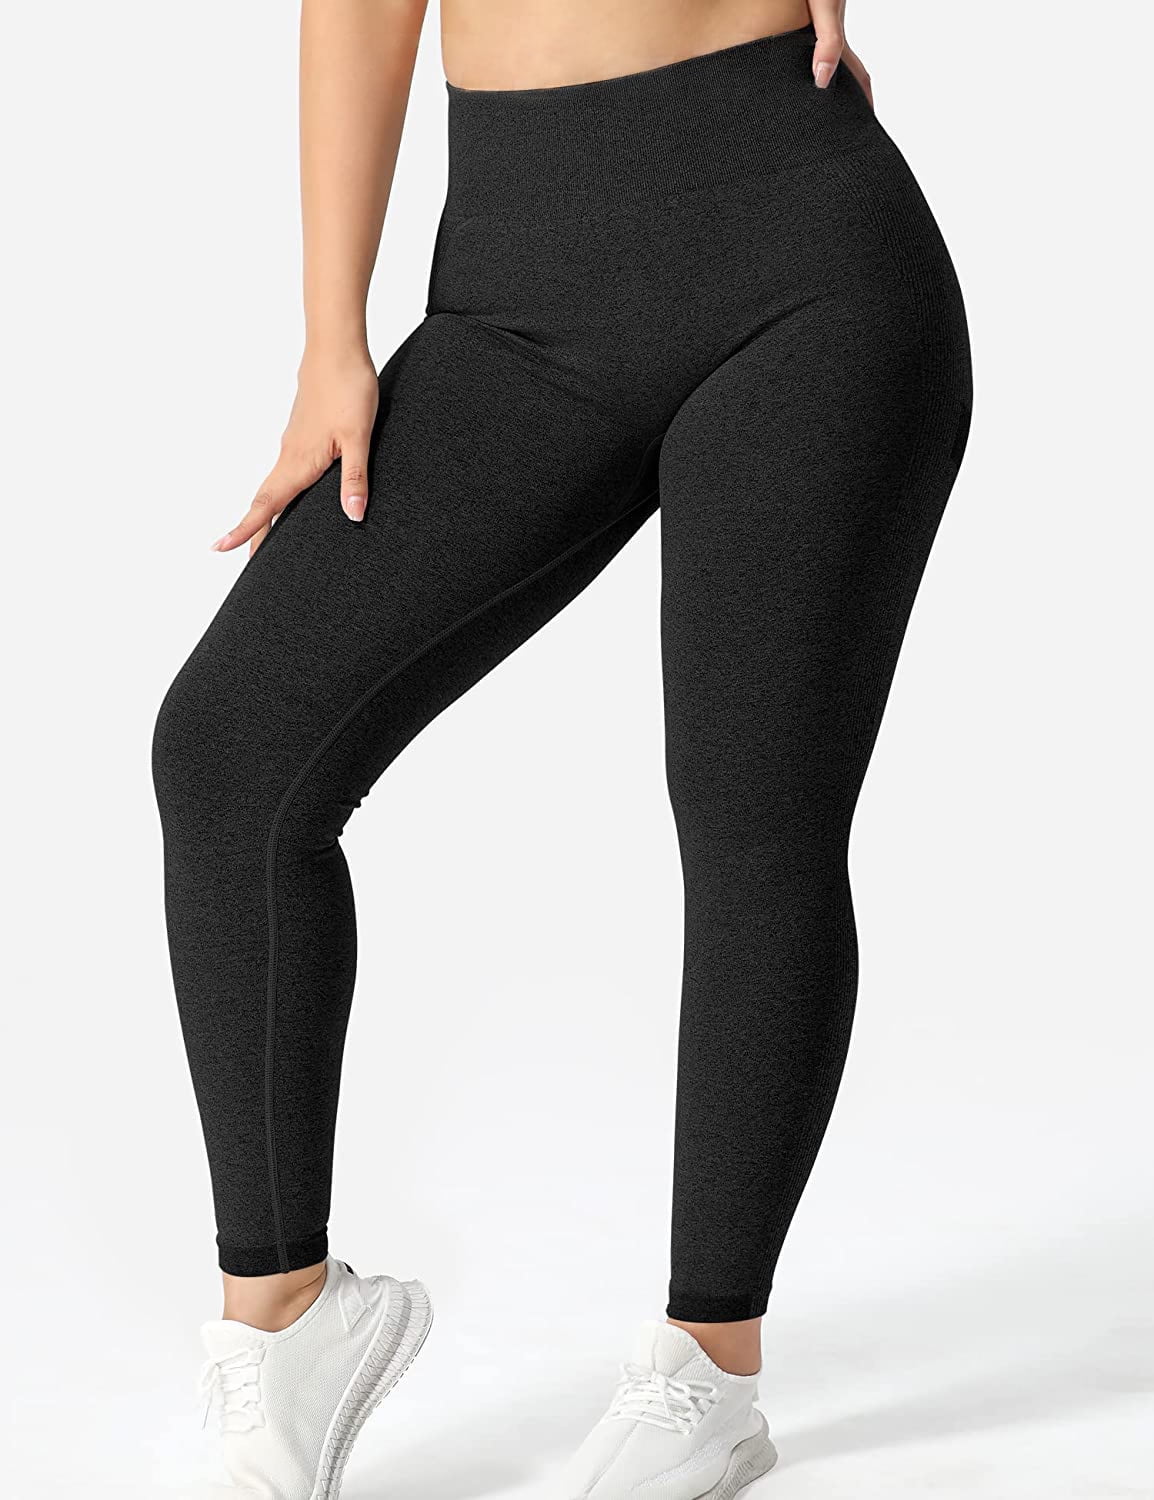 Legging for Women UK Plus Size Sexy Mesh Stitching Tight Stretch Yoga  Shorts High Waisted Workout Shorts Cal Butt Lift Tight Pants Sports Hip  Warping